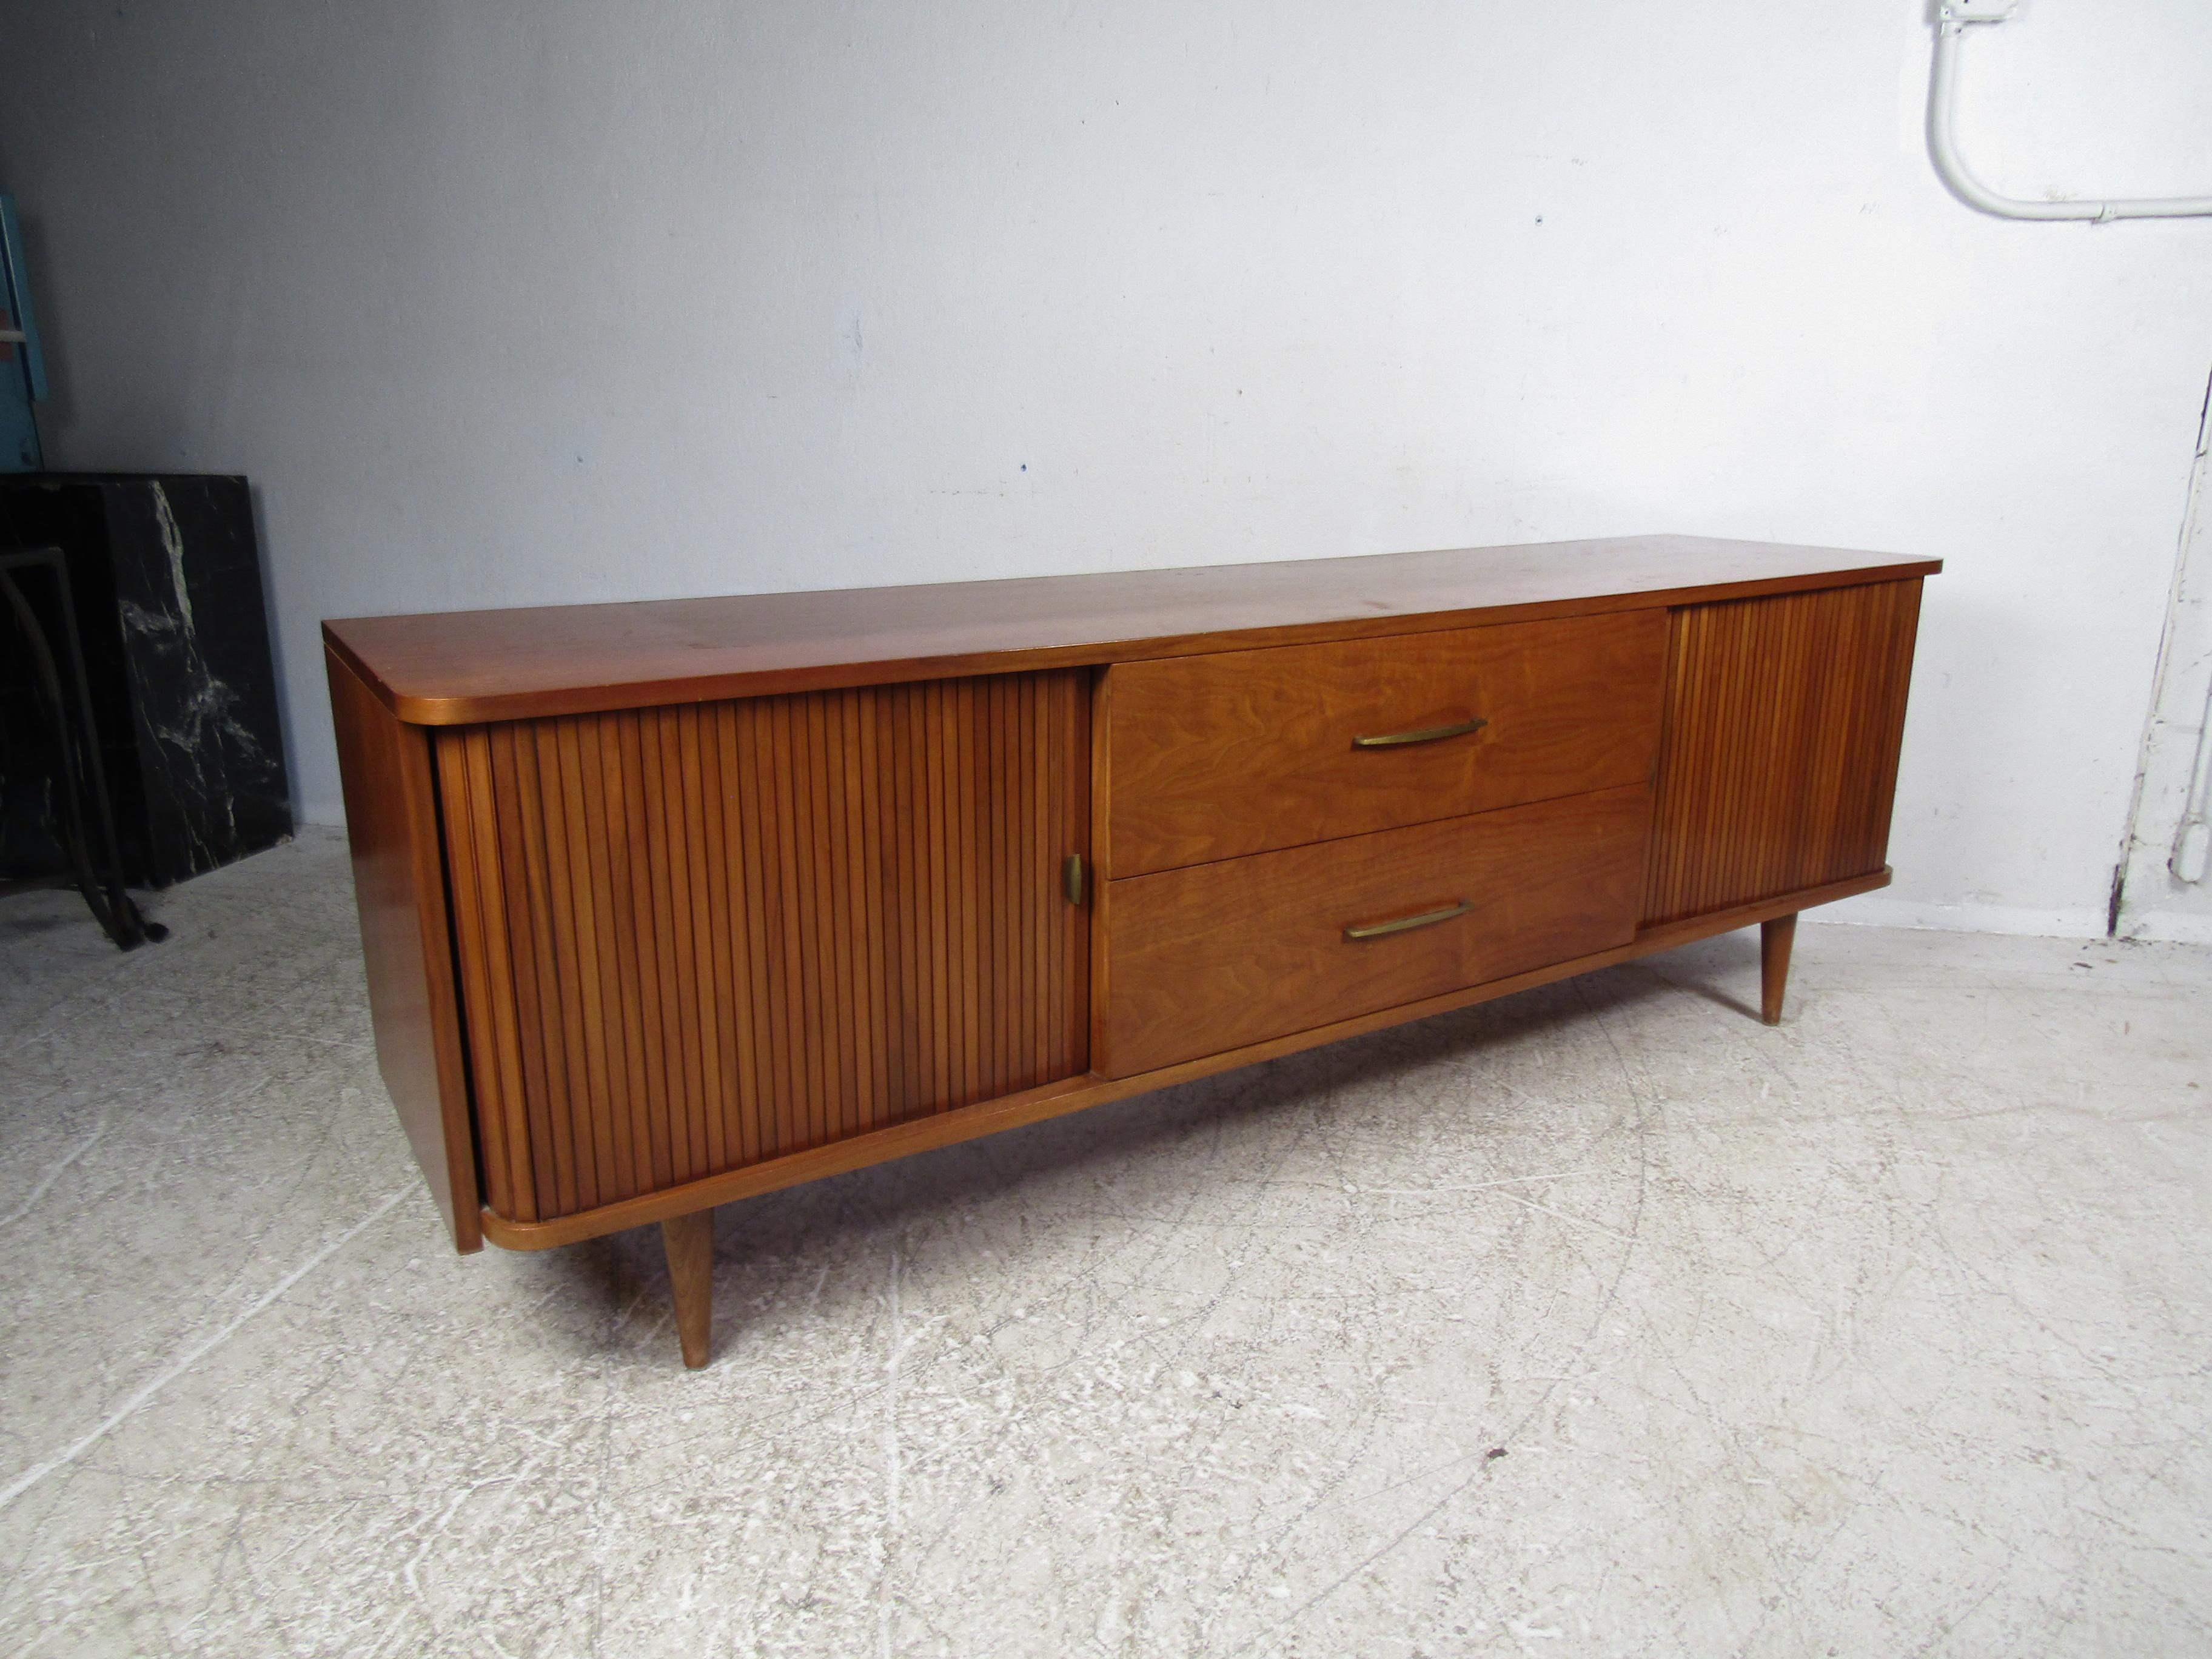 This beautiful vintage modern credenza features tambour doors on each side making this piece stand out from the rest. An elegant walnut finish and four sturdy tapered legs display quality craftsmanship. The large compartments with adjustable shelves